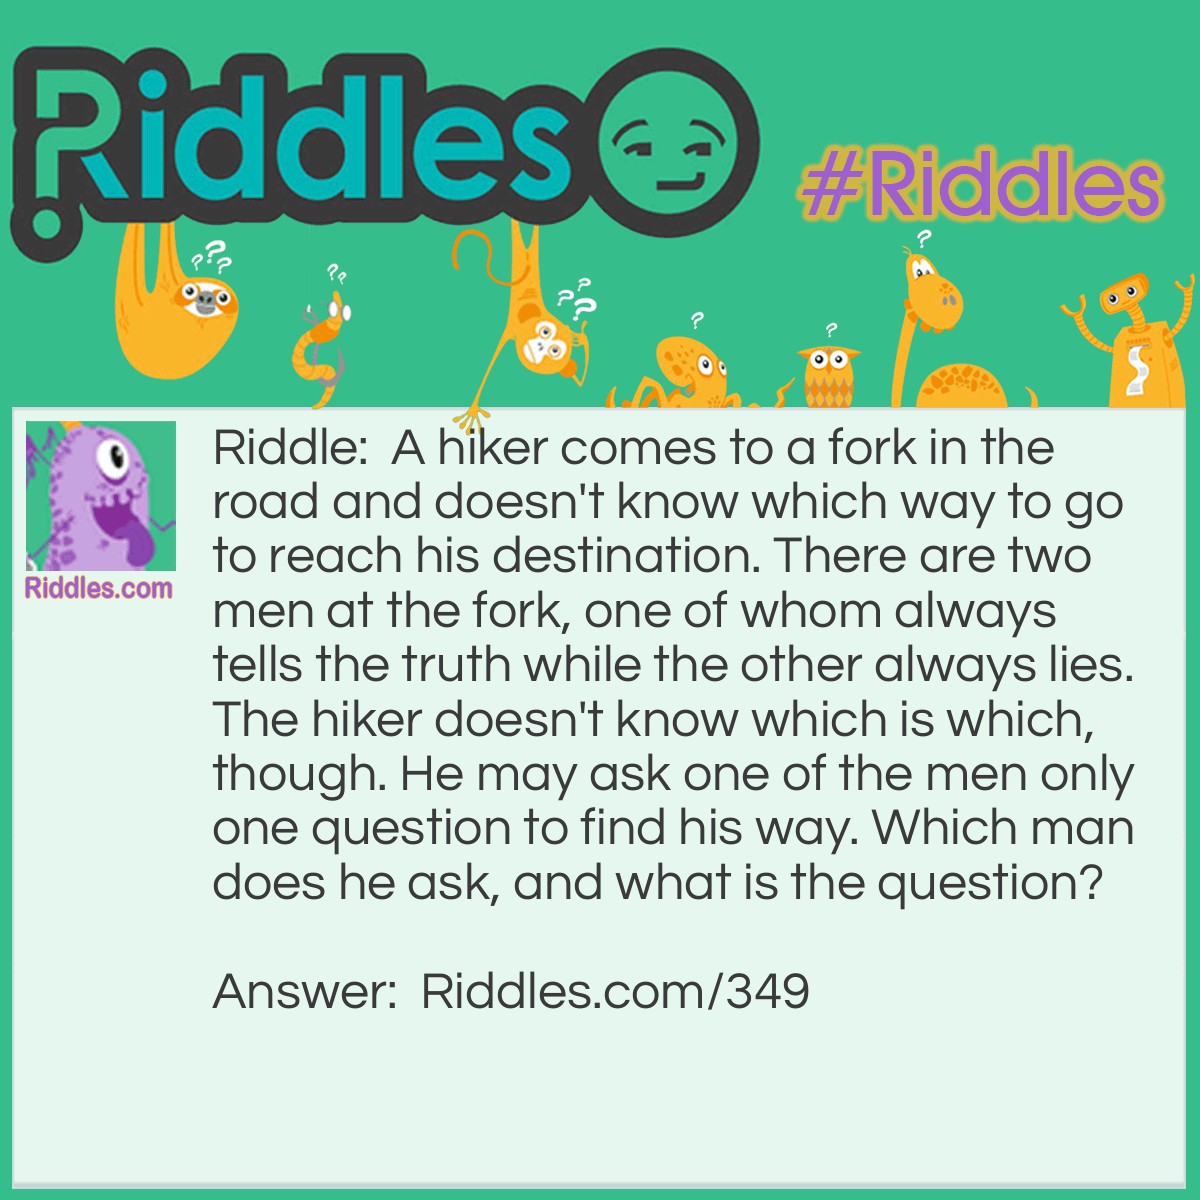 Riddle: A hiker comes to a fork in the road and doesn't know which way to go to reach his destination. There are two men at the fork, one of whom always tells the truth while the other always lies. The hiker doesn't know which is which, though. He may ask one of the men only one question to find his way. Which man does he ask, and what is the question? Answer: Either man should be asked the following question: "If I were to ask you if this is the way I should go, would you say yes?" While asking the question, the hiker should be pointing at either of the directions going from the fork.